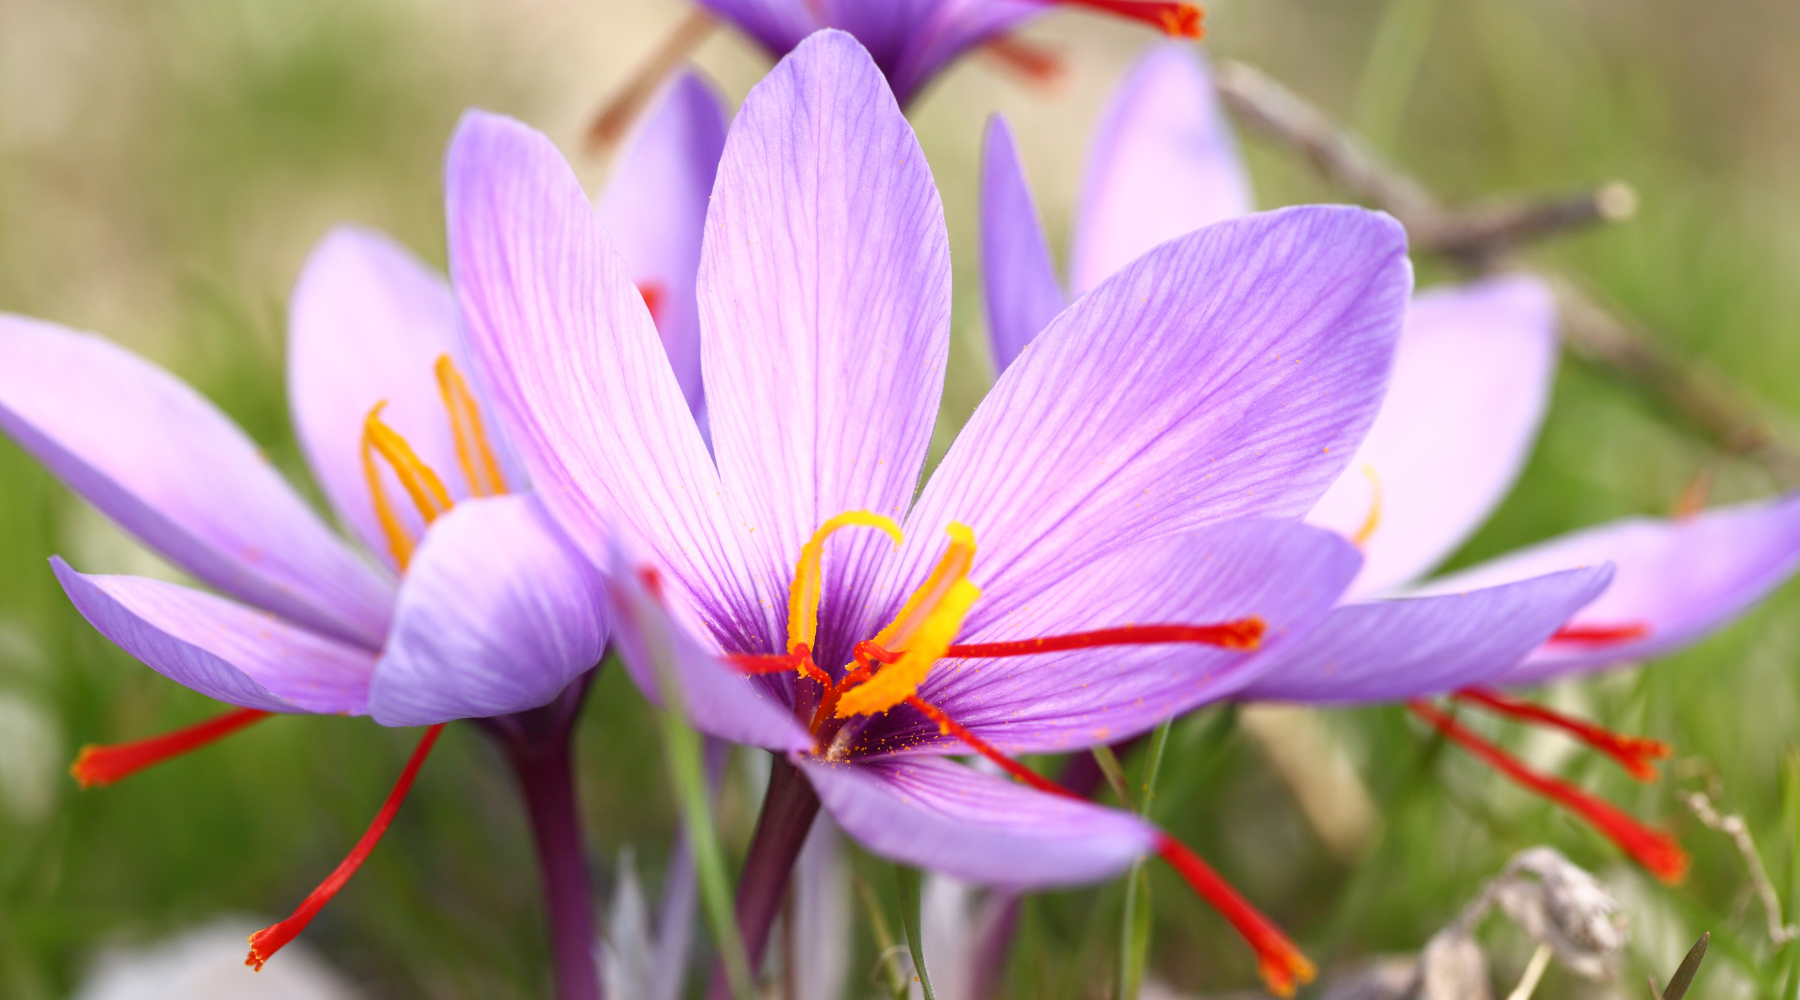 Purple saffron flowers with red stamen blooming in the grass.